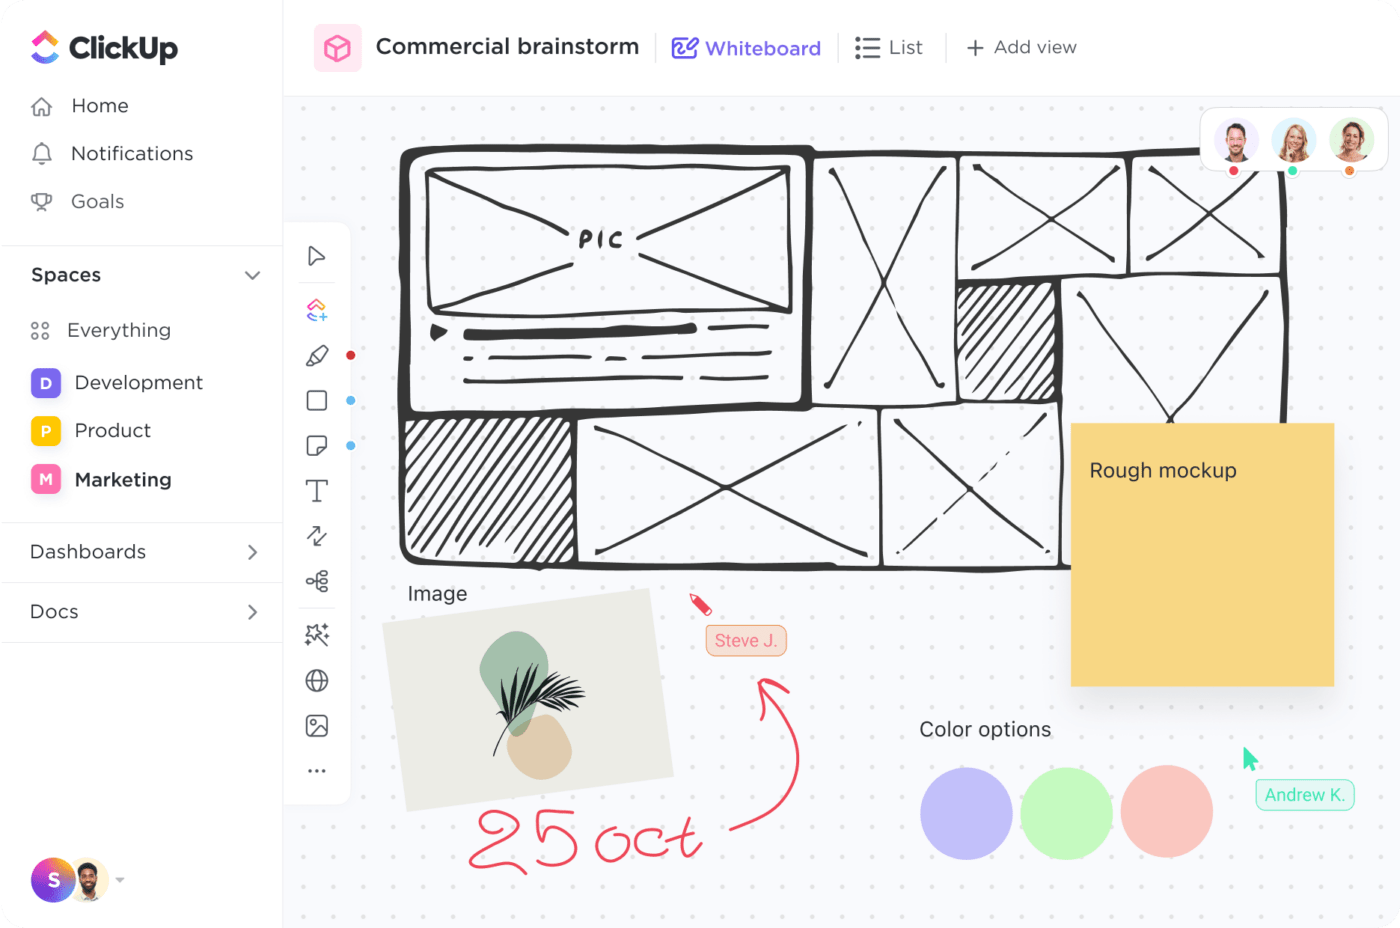 Add notes, text, images, and more to your Whiteboard in ClickUp